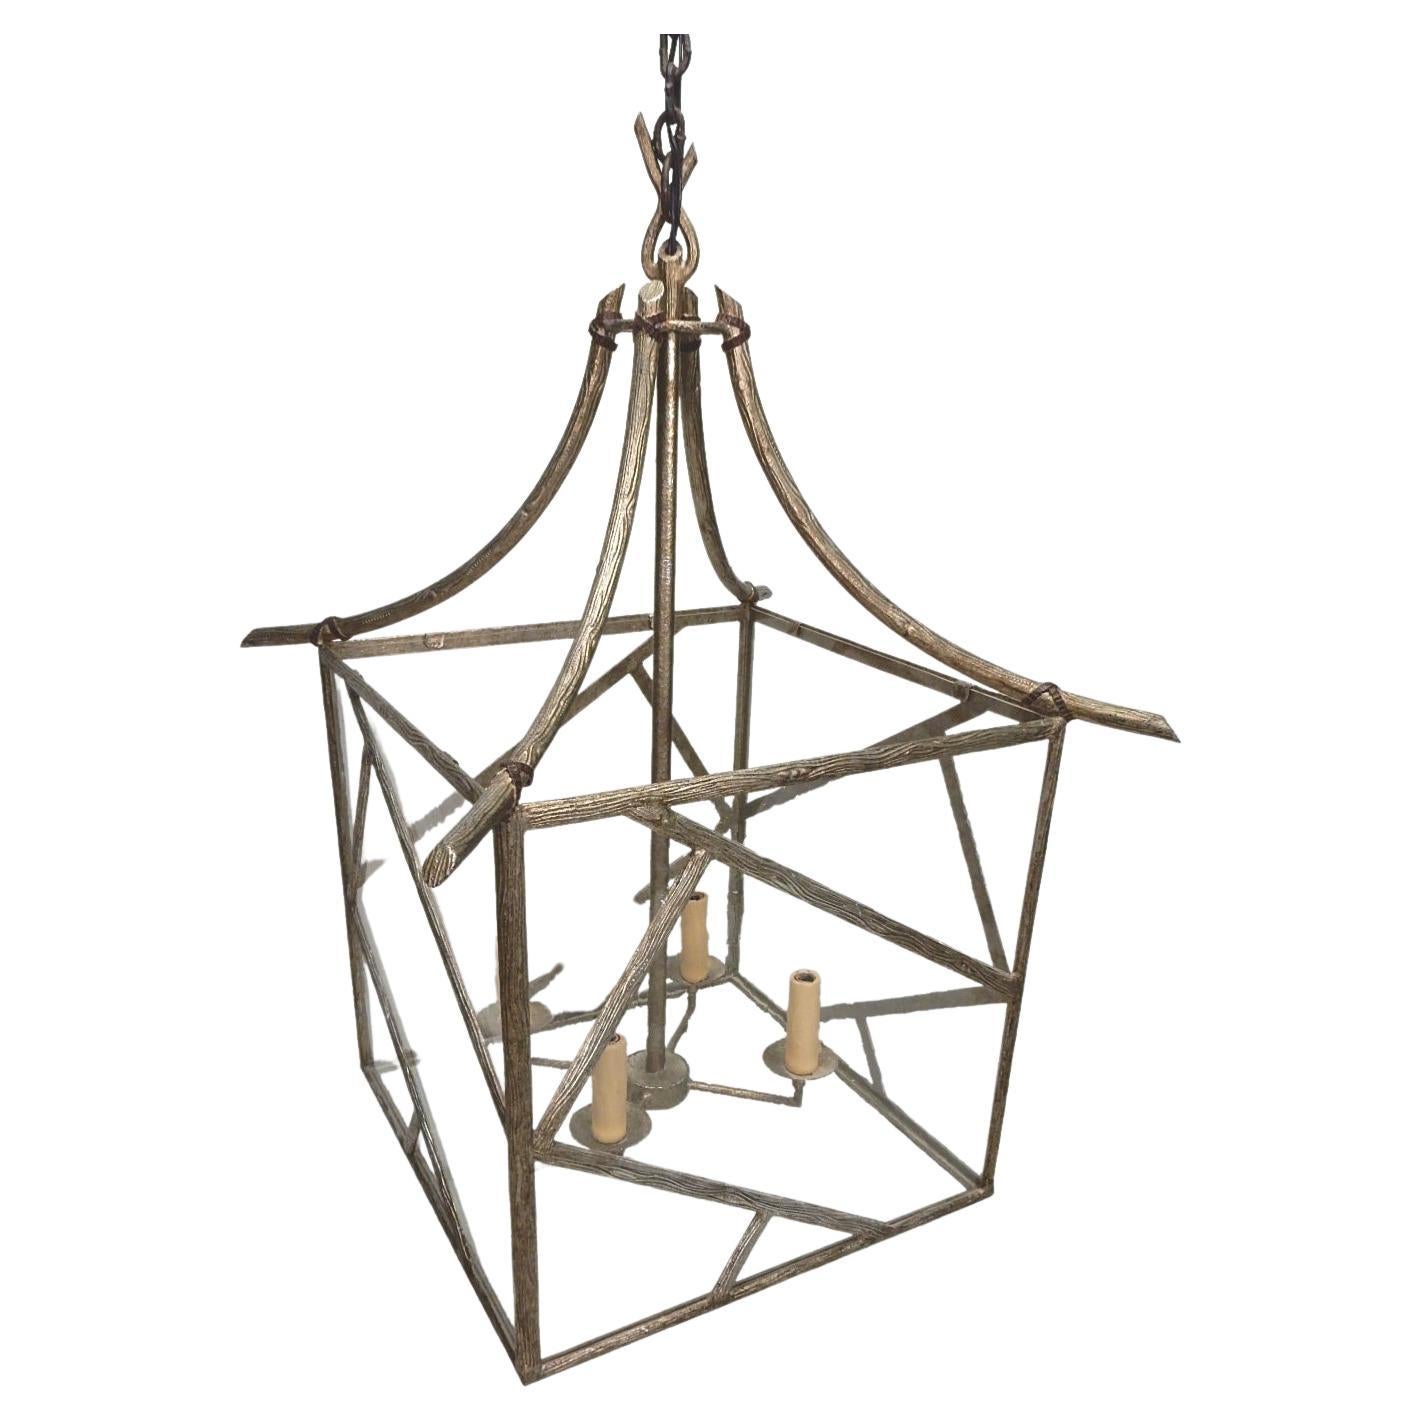 Enormous faux bois twig pagoda chandelier made of brass with platinum finish, circa 1970s.
Massive piece measuring over 2 feet wide and 3 feet tall and a 9 foot drop from ceiling via
a hand forged 6 foot chain with a matching 8 inch wide matching